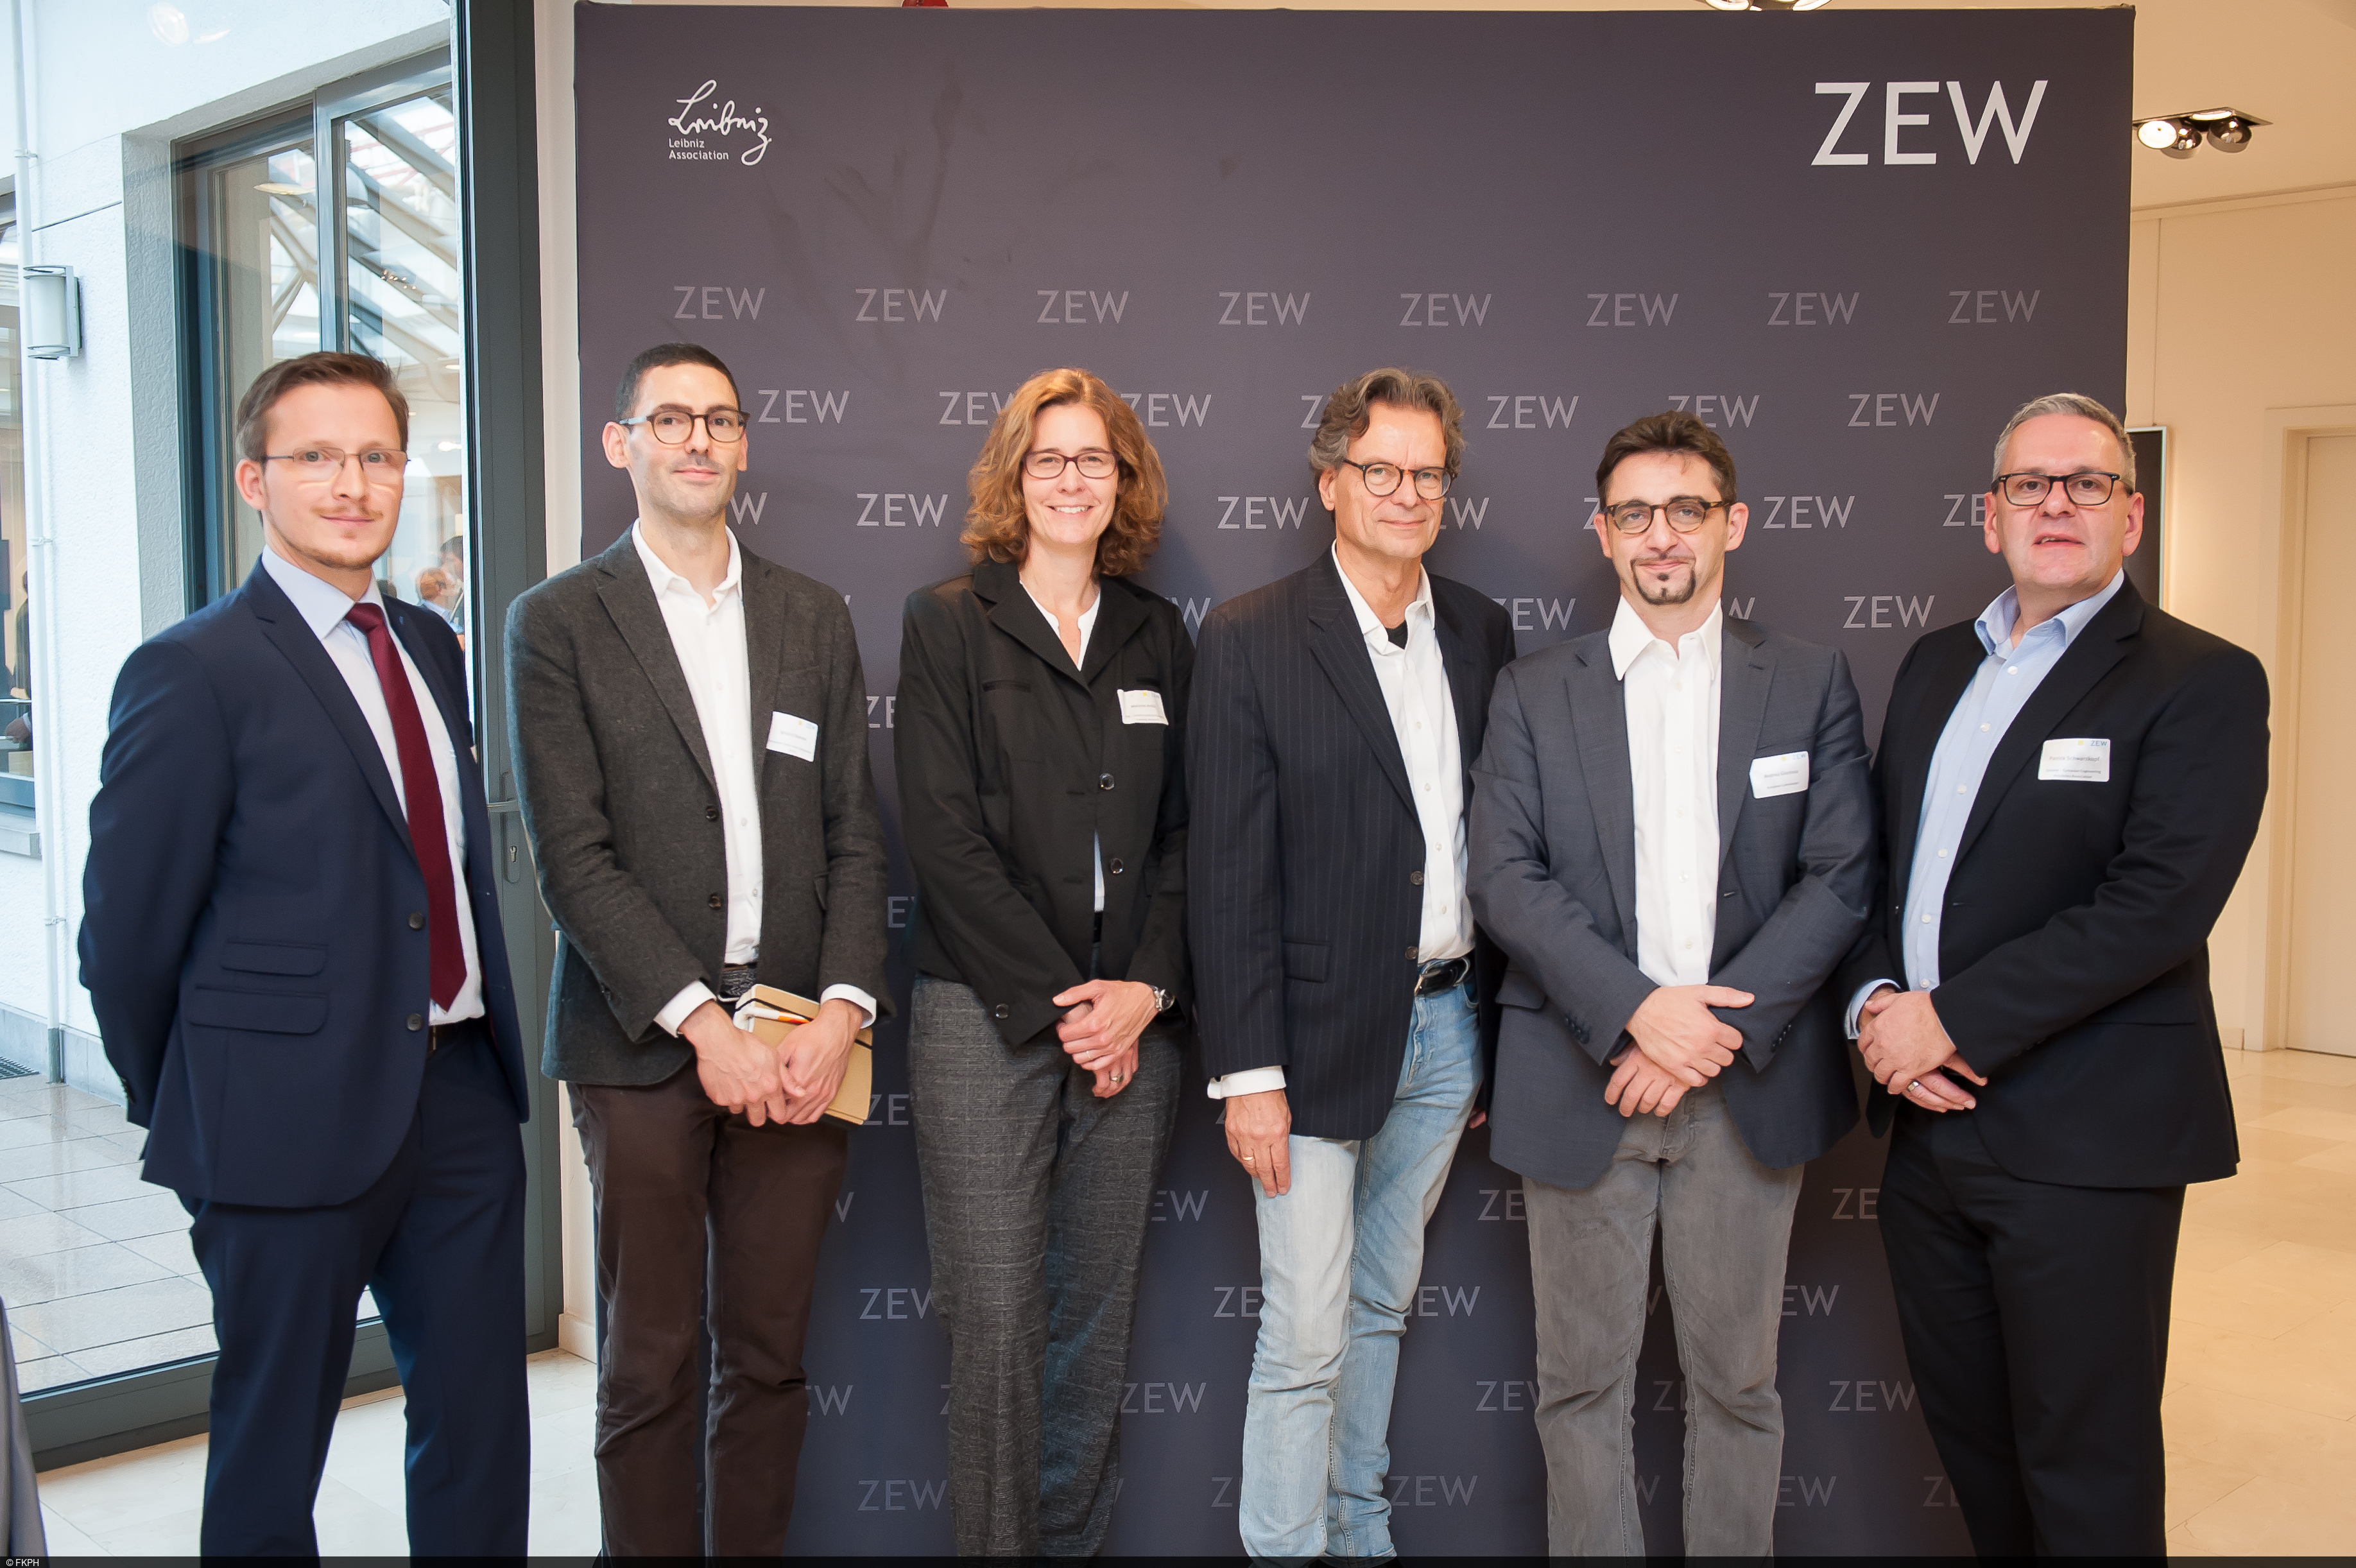 Participants of the ZEW Lunch Debate on the topic of digitisation in the workplace